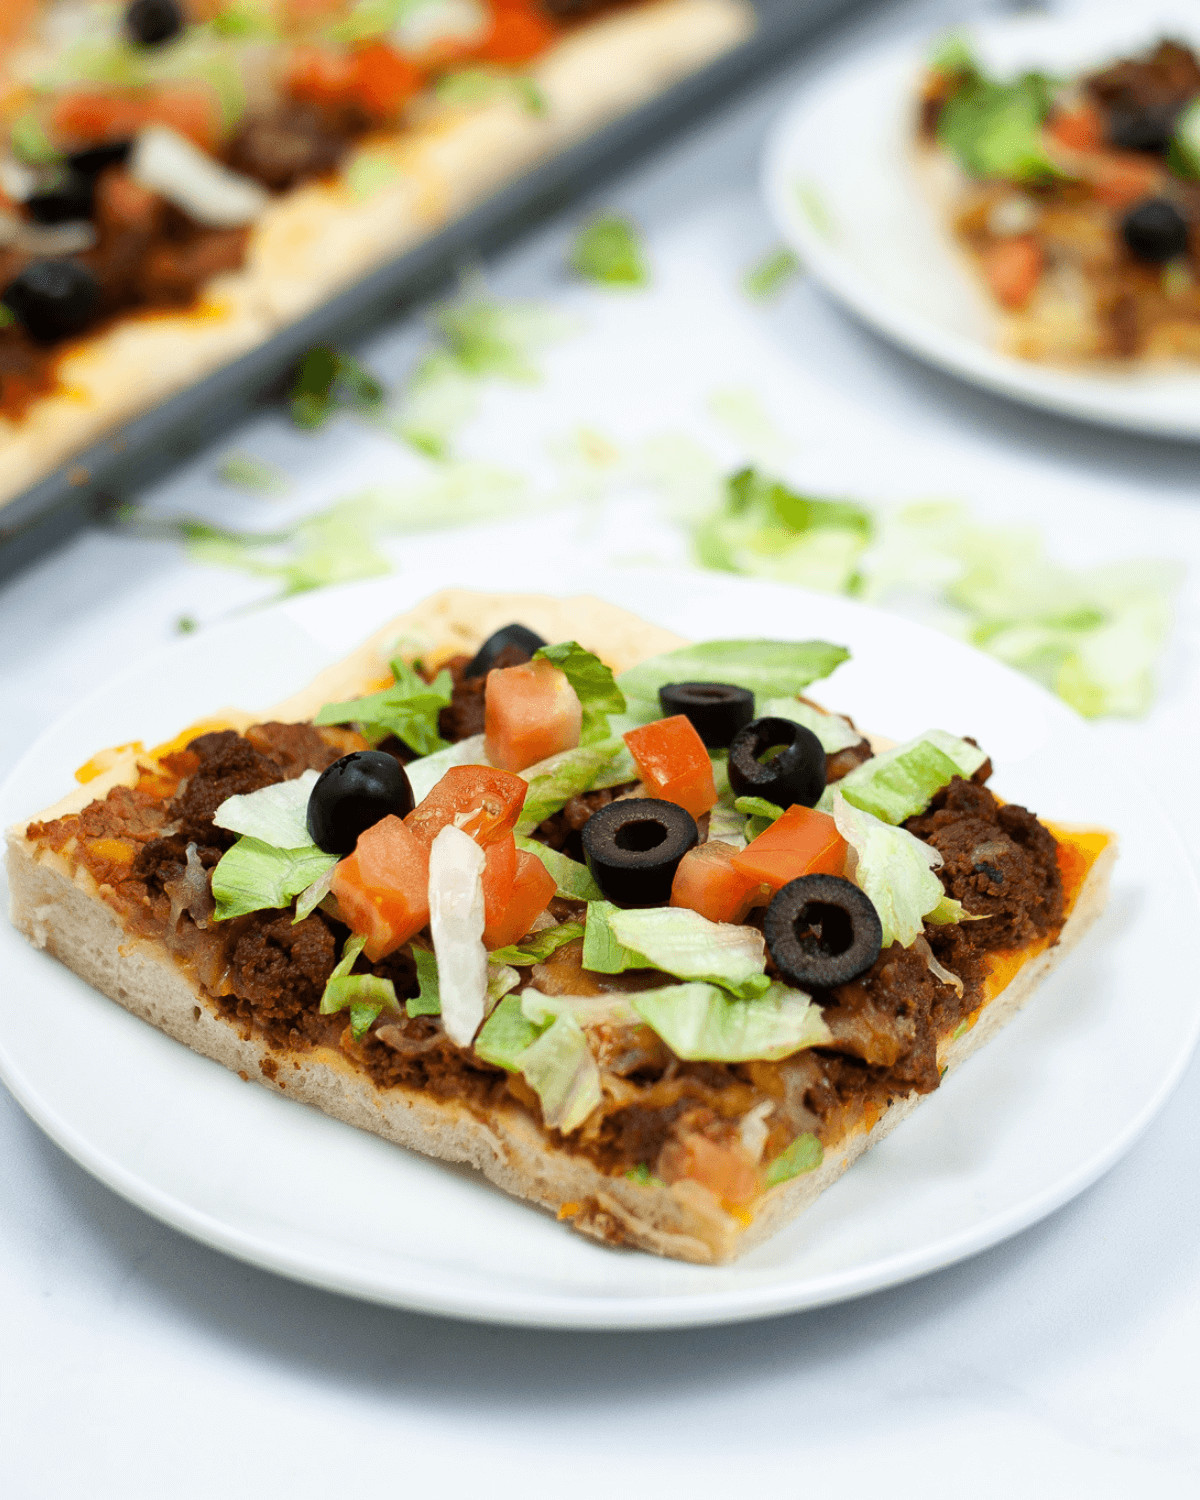 A slice with ground beef, lettuce, diced tomatoes, and black olives on a white plate, with more pizza in the background.